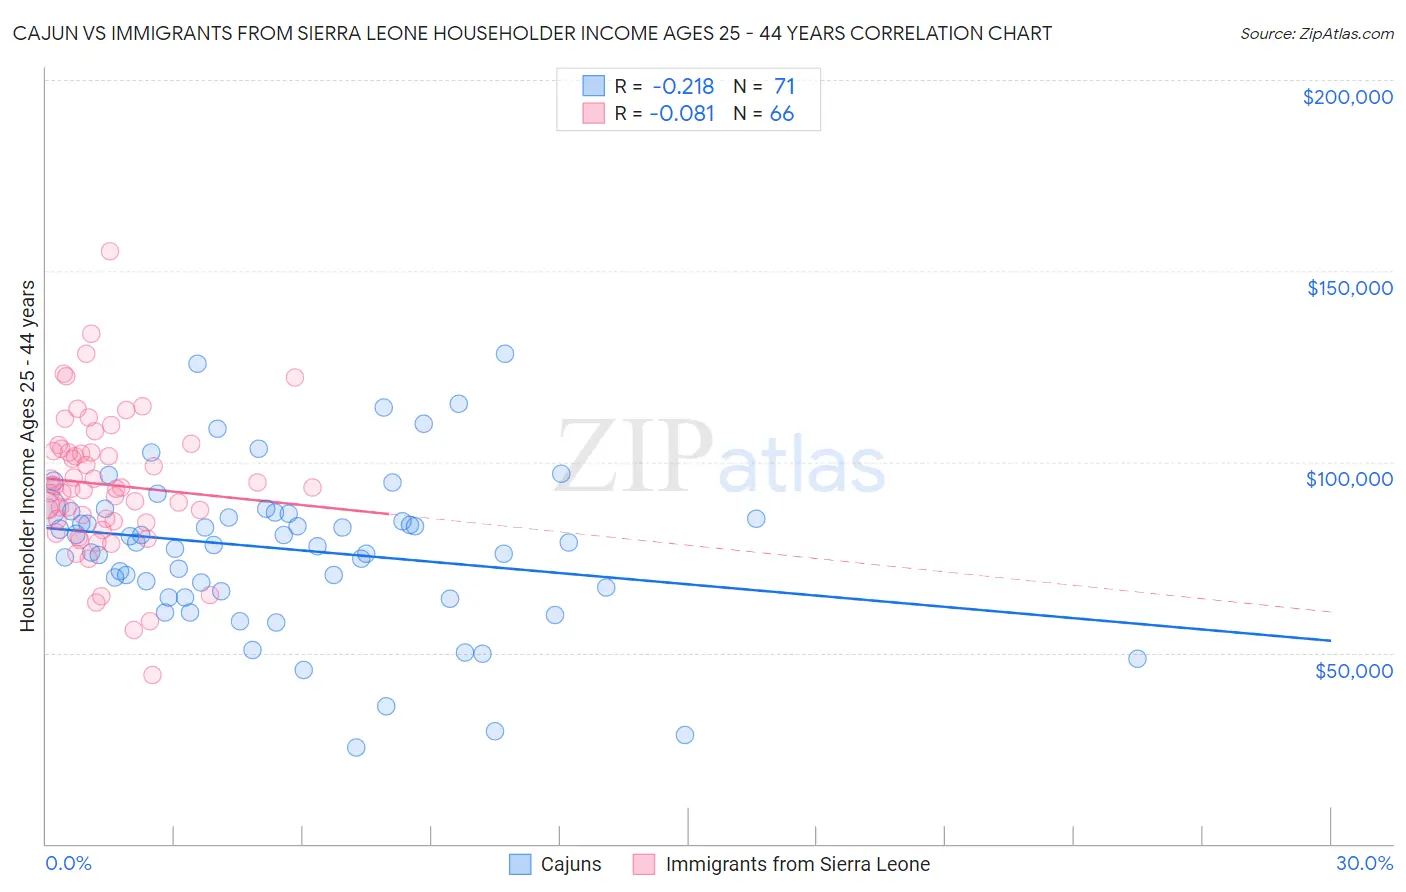 Cajun vs Immigrants from Sierra Leone Householder Income Ages 25 - 44 years